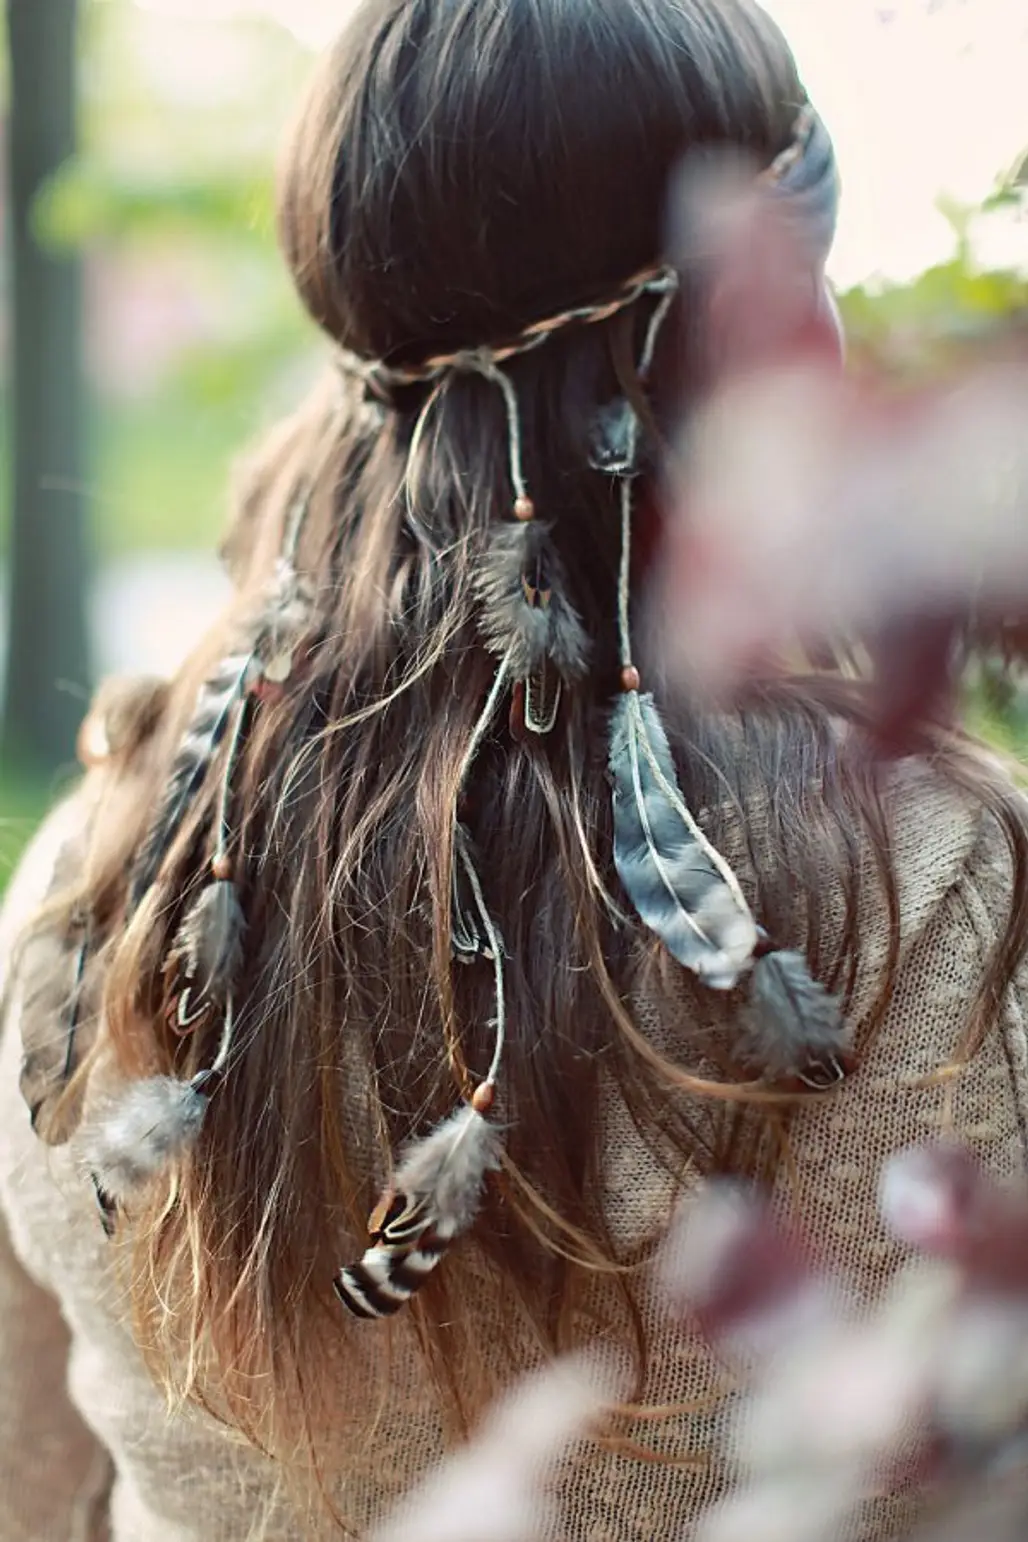 Wear This CUSTOM Native Headband with Feathers Paired with Shorts and a Tee